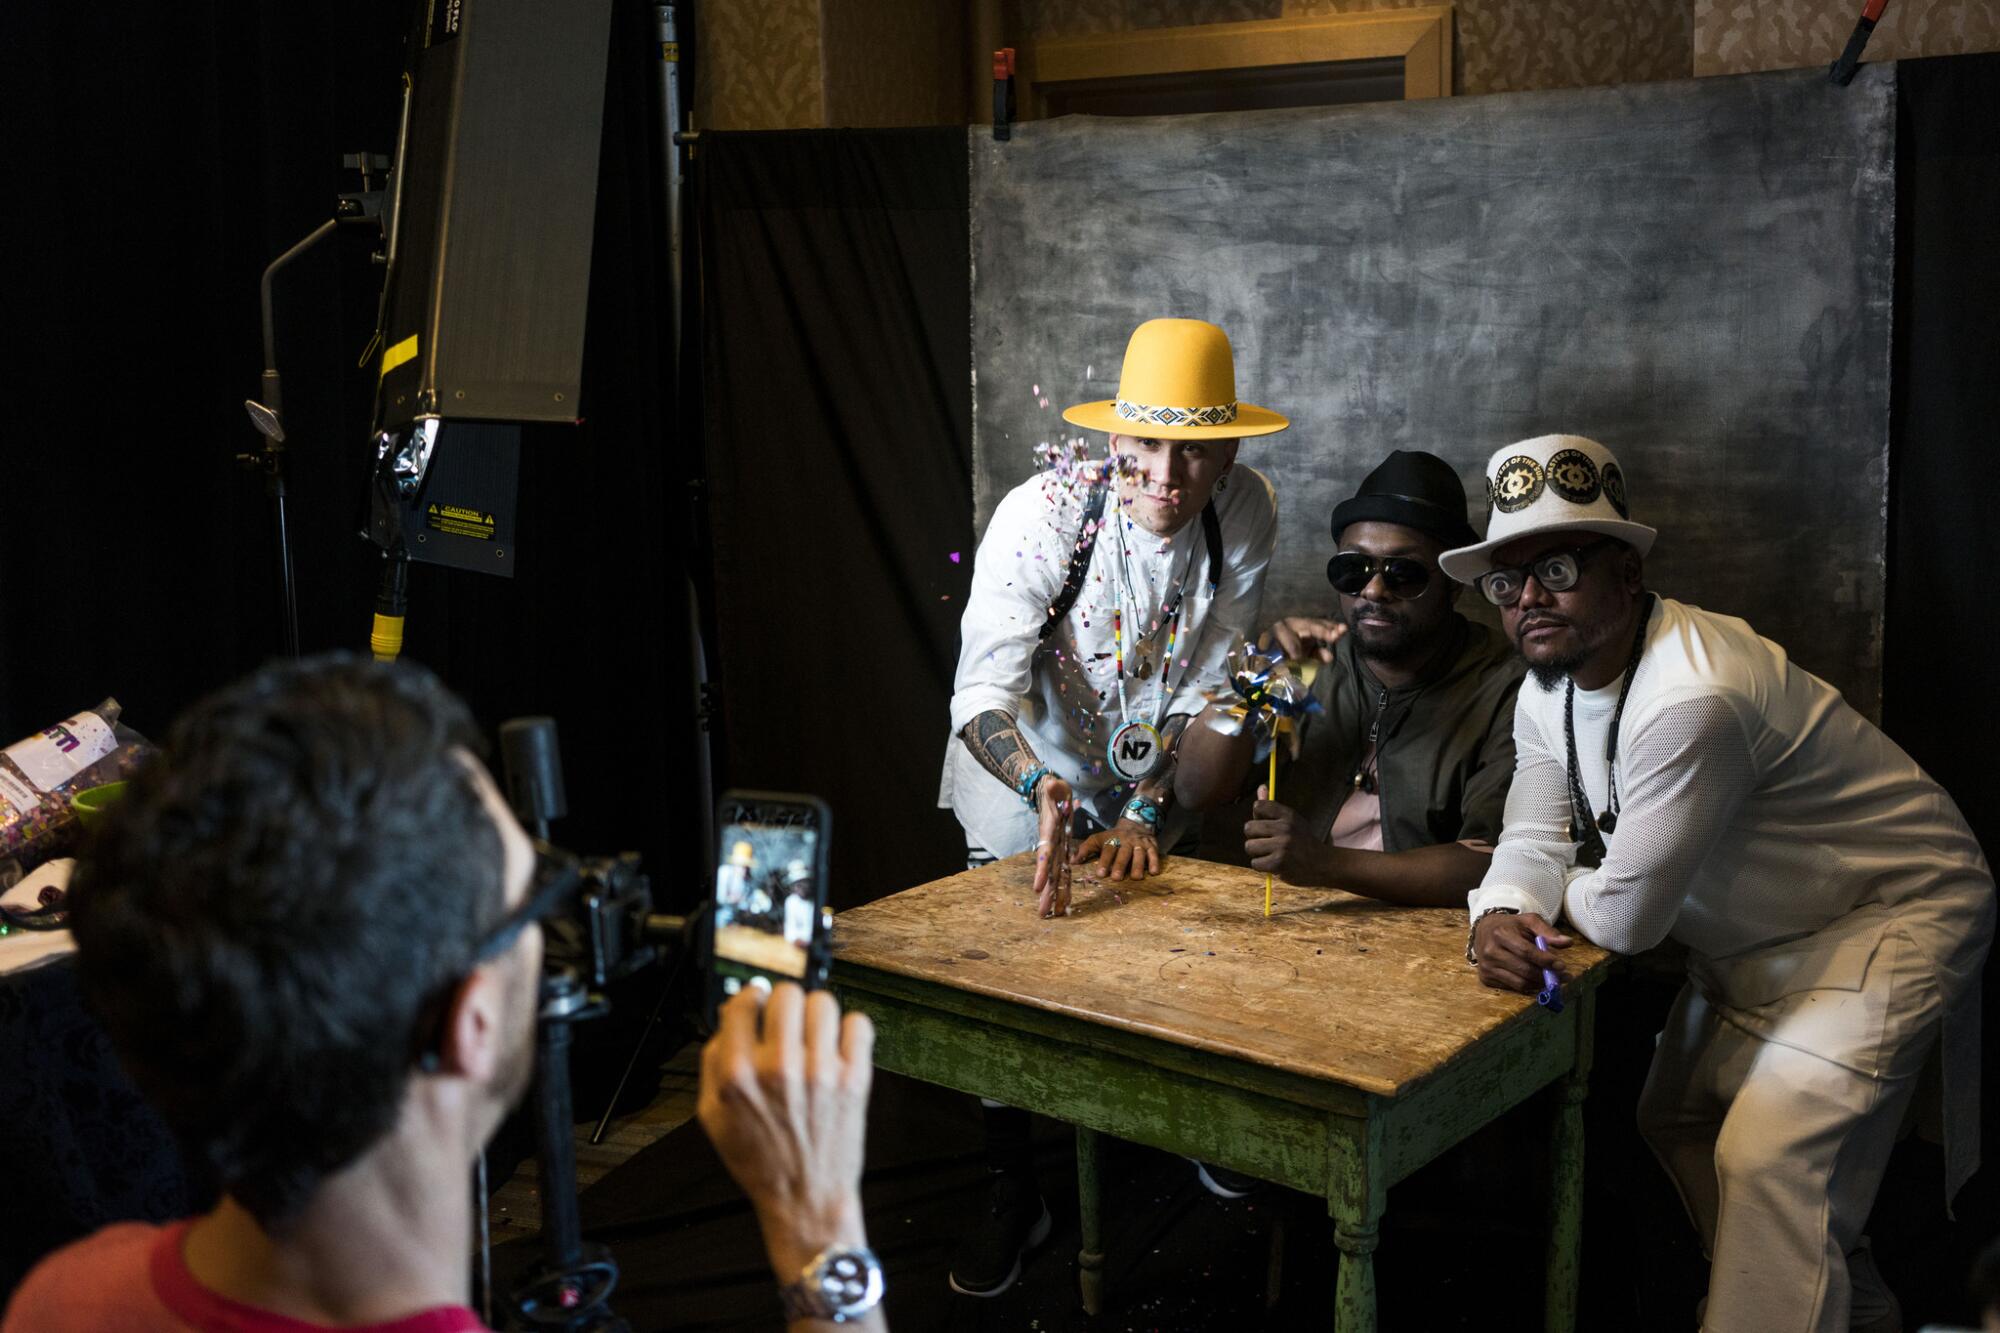 The Black Eyed Peas pose for a photo at San Diego Comic-Con.